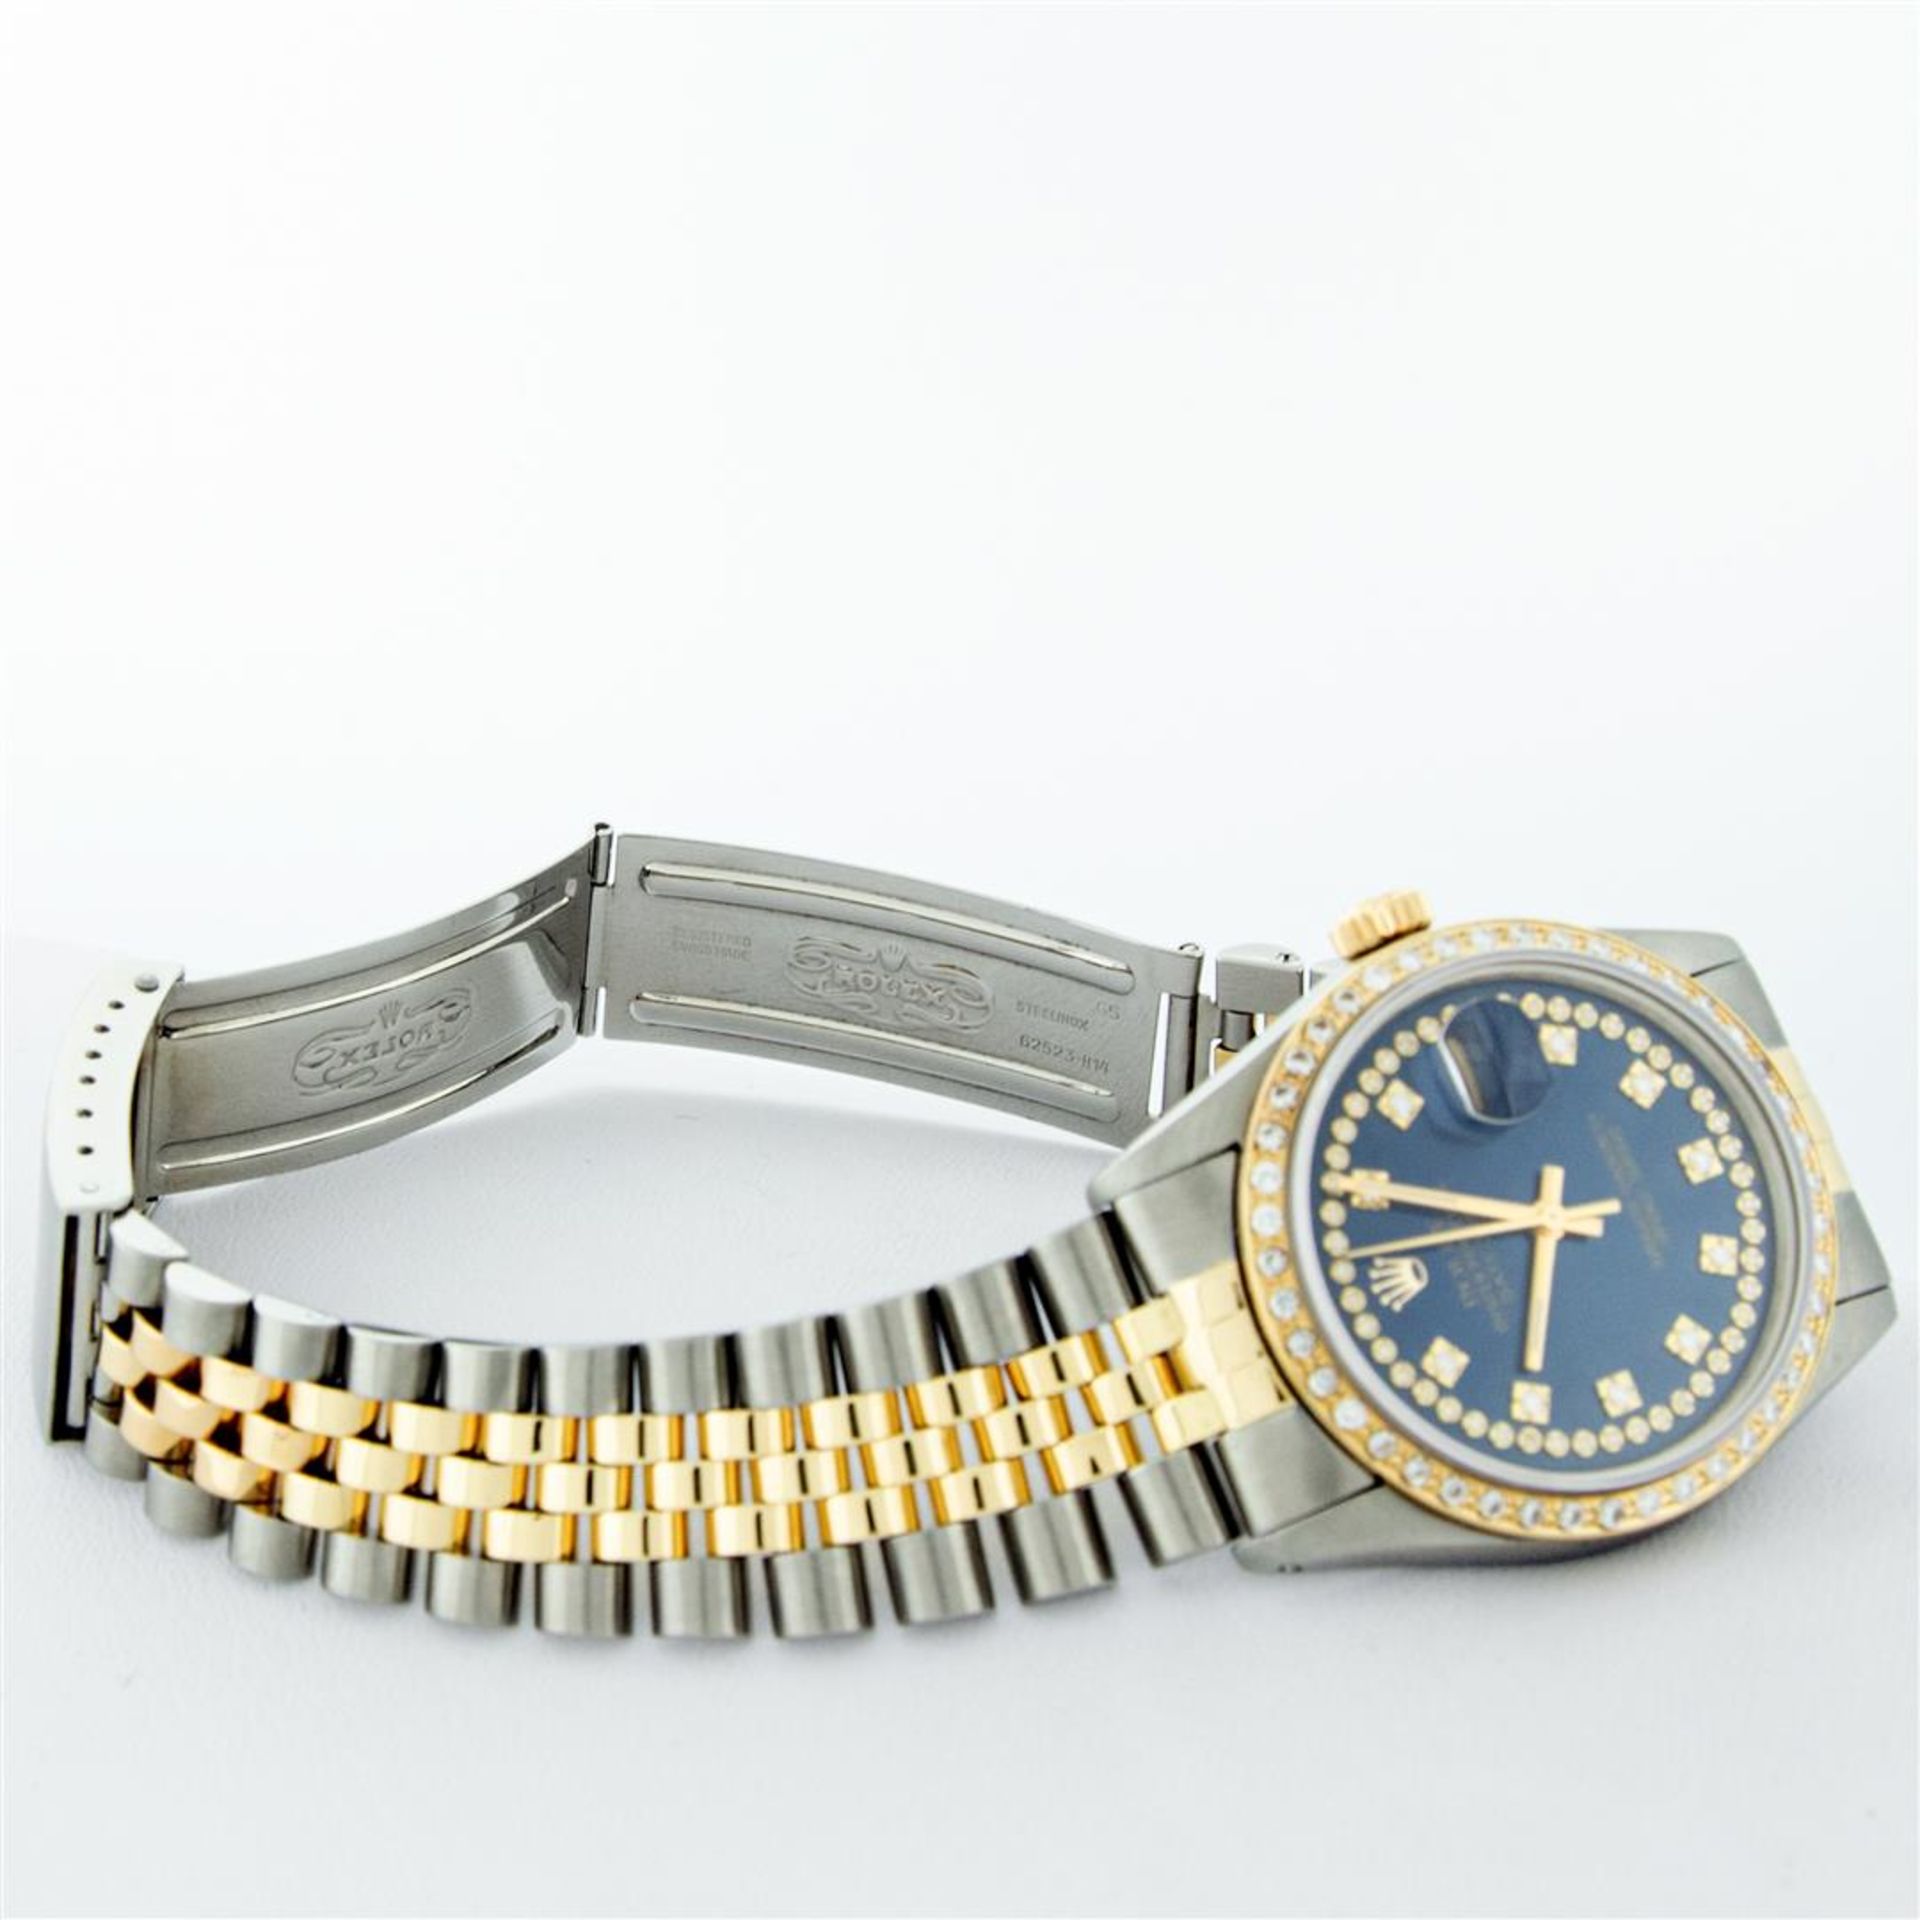 Rolex Mens 2 Tone Blue String VS Diamond Datejust Wristwatch Oyster Perpetual - Image 8 of 9